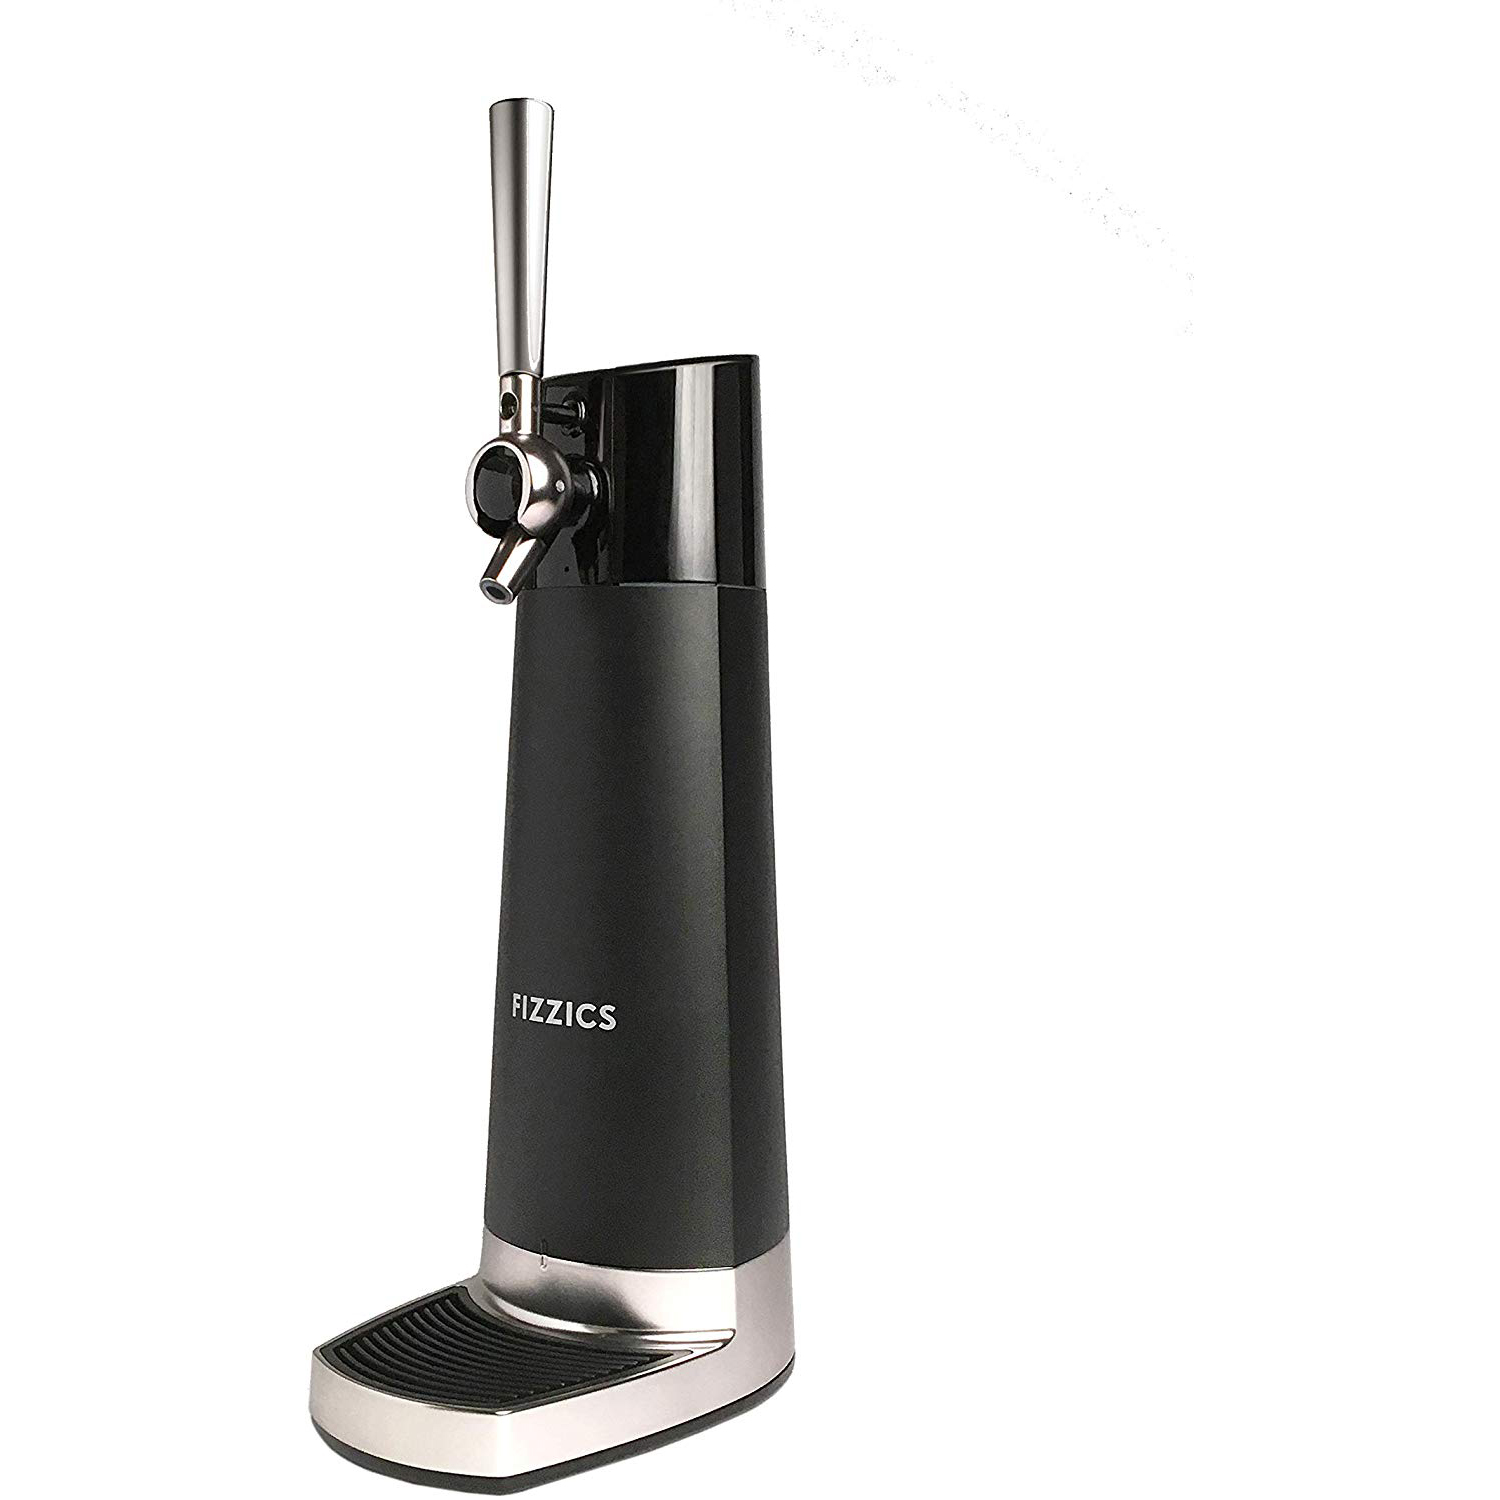 Fizzics FZ403 DraftPour Nitro-Style USB-Powered Home Bar Beer Tap Dispenser - image 1 of 6